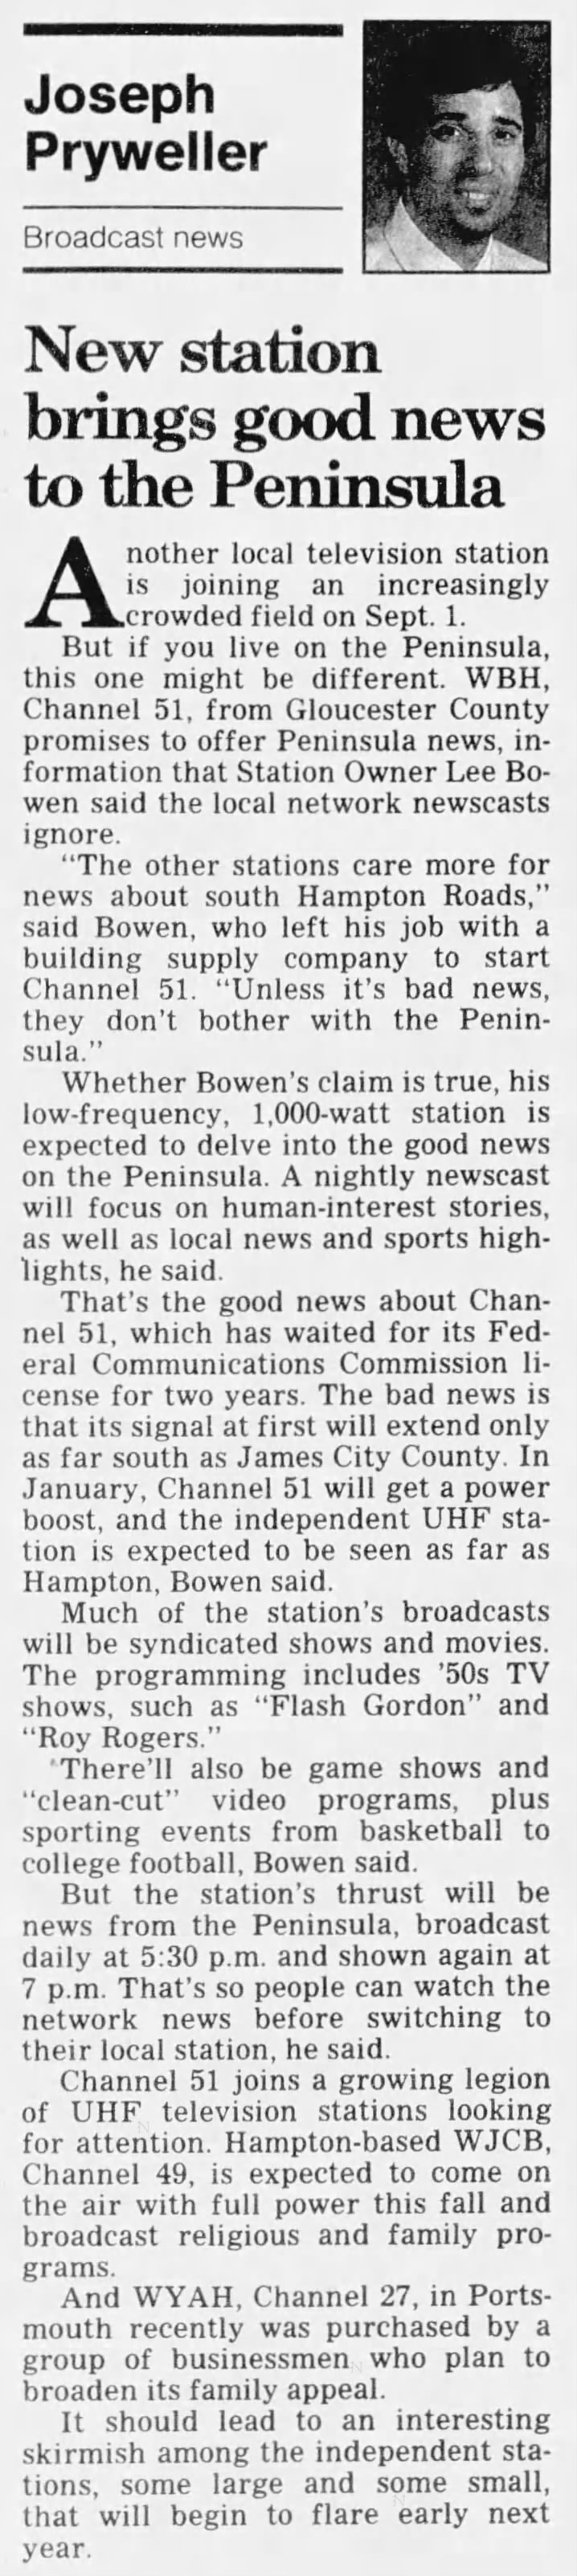 New station brings good news to the Peninsula (W51BH)